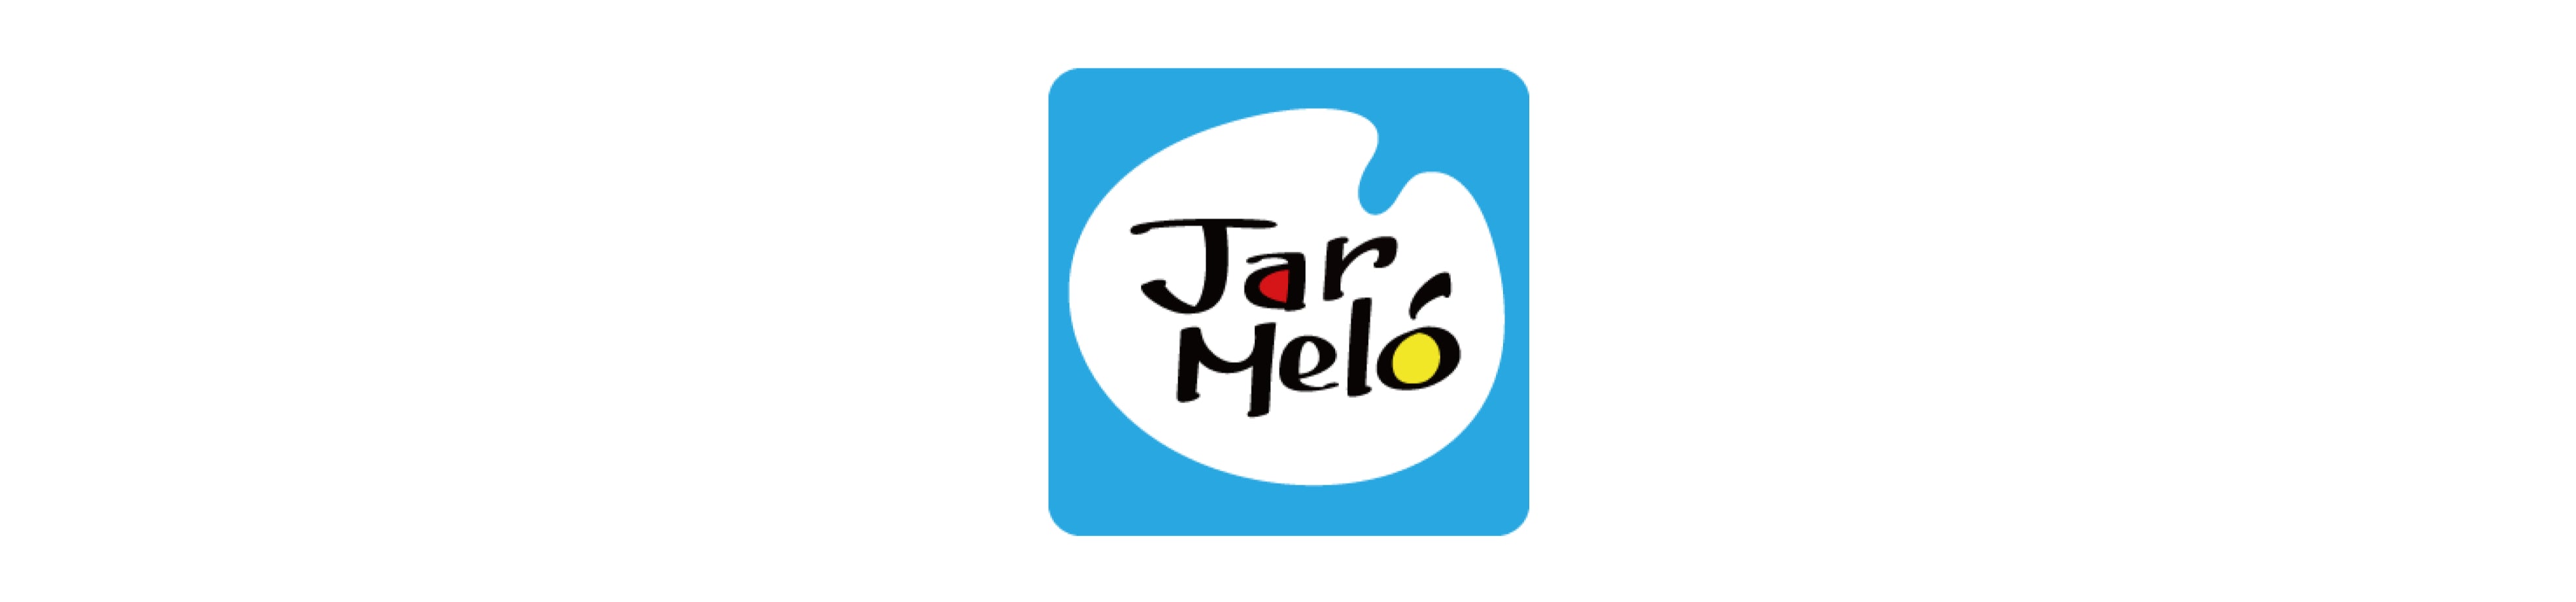 Jar Melo Products